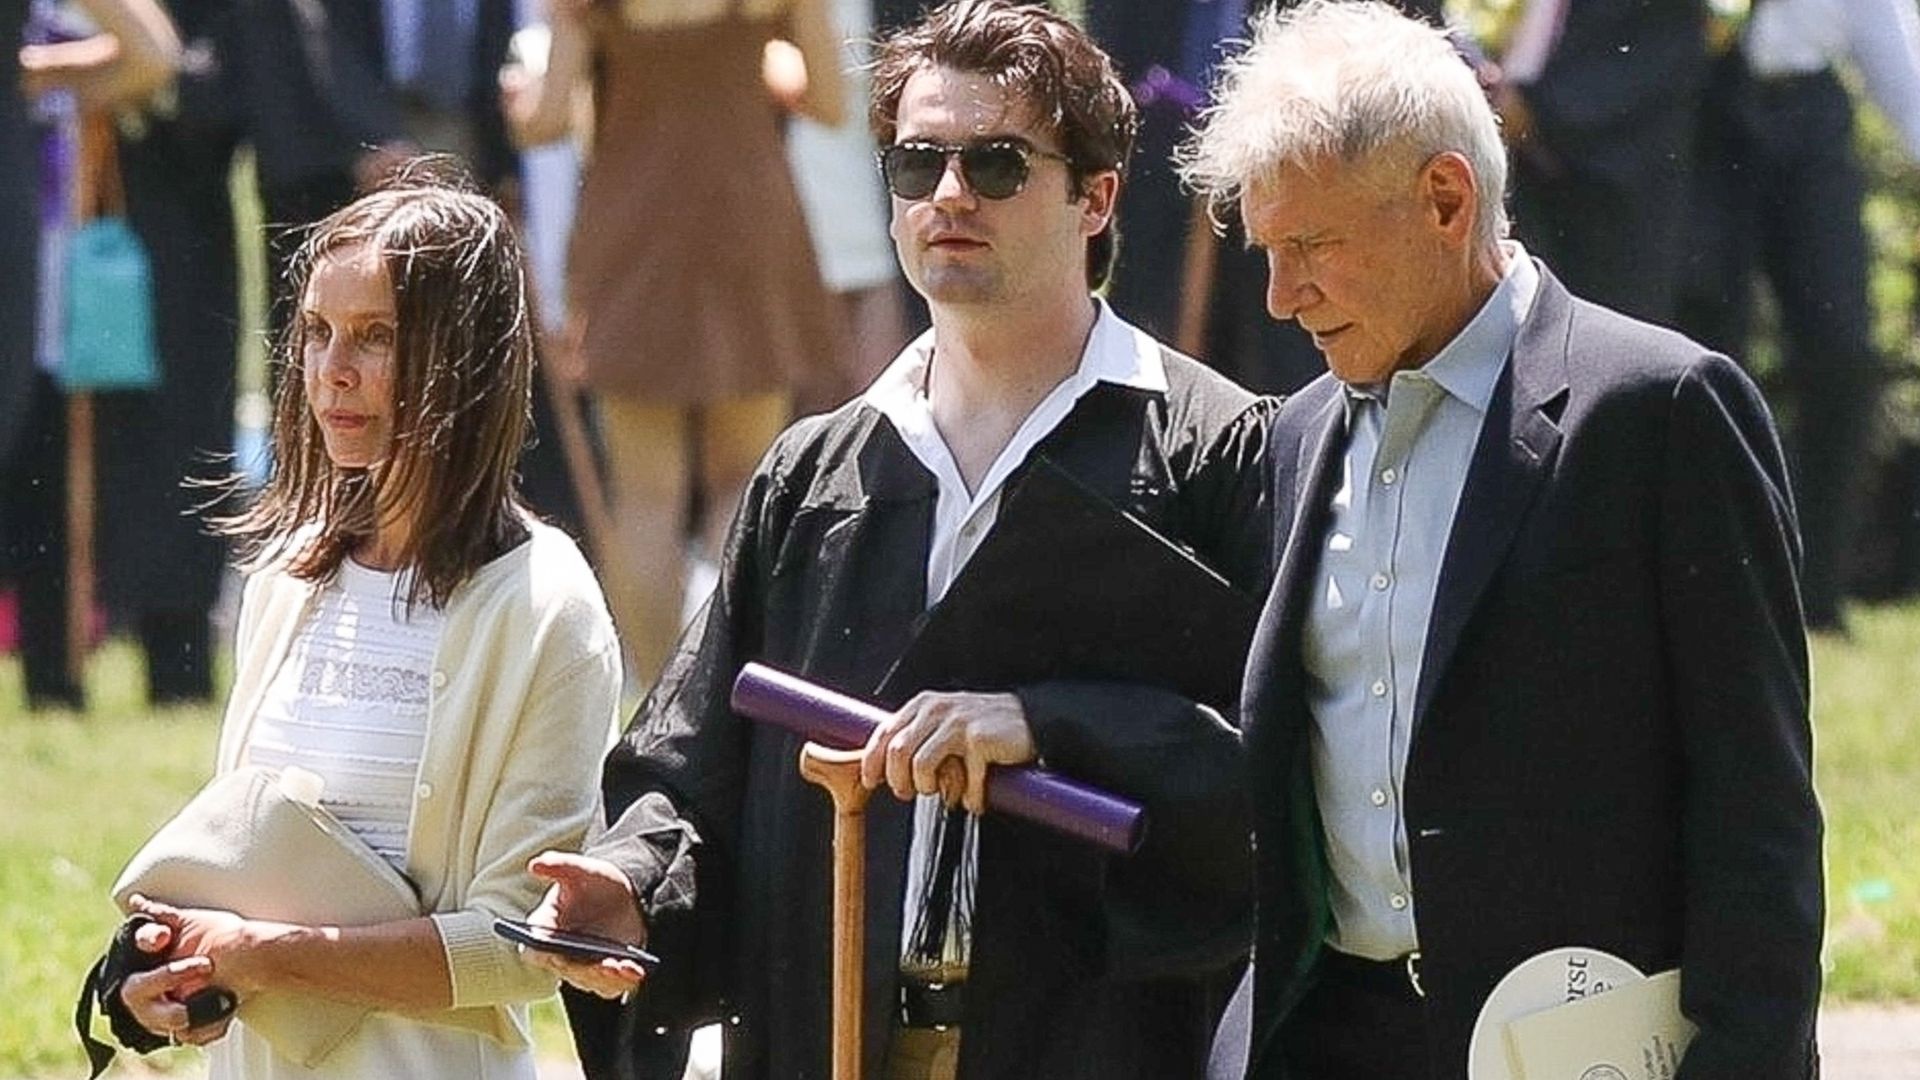 Harrison Ford and Calista Flockhart beam with pride during rarely seen son Liam’s graduation